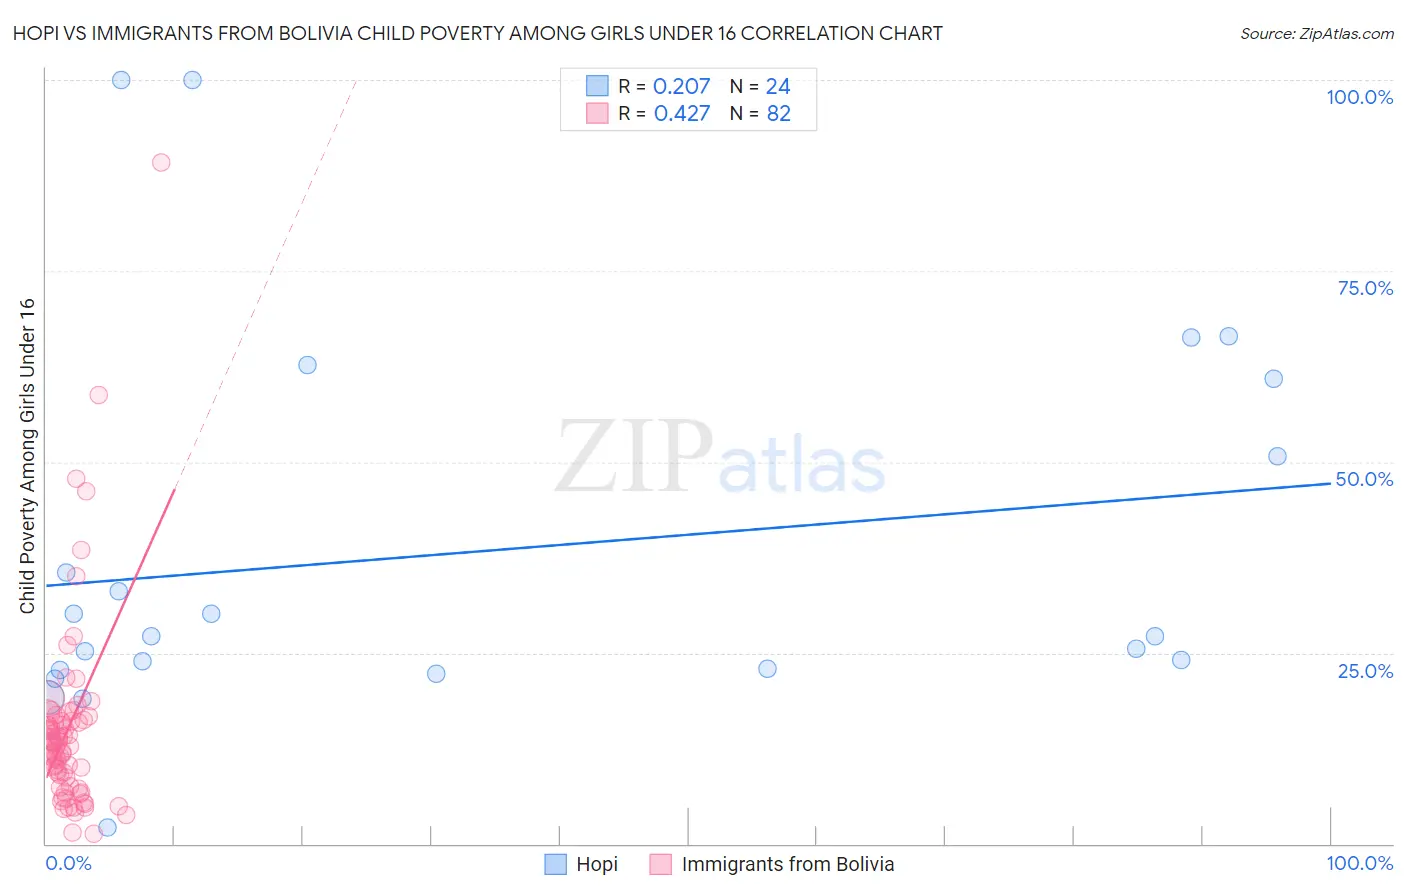 Hopi vs Immigrants from Bolivia Child Poverty Among Girls Under 16